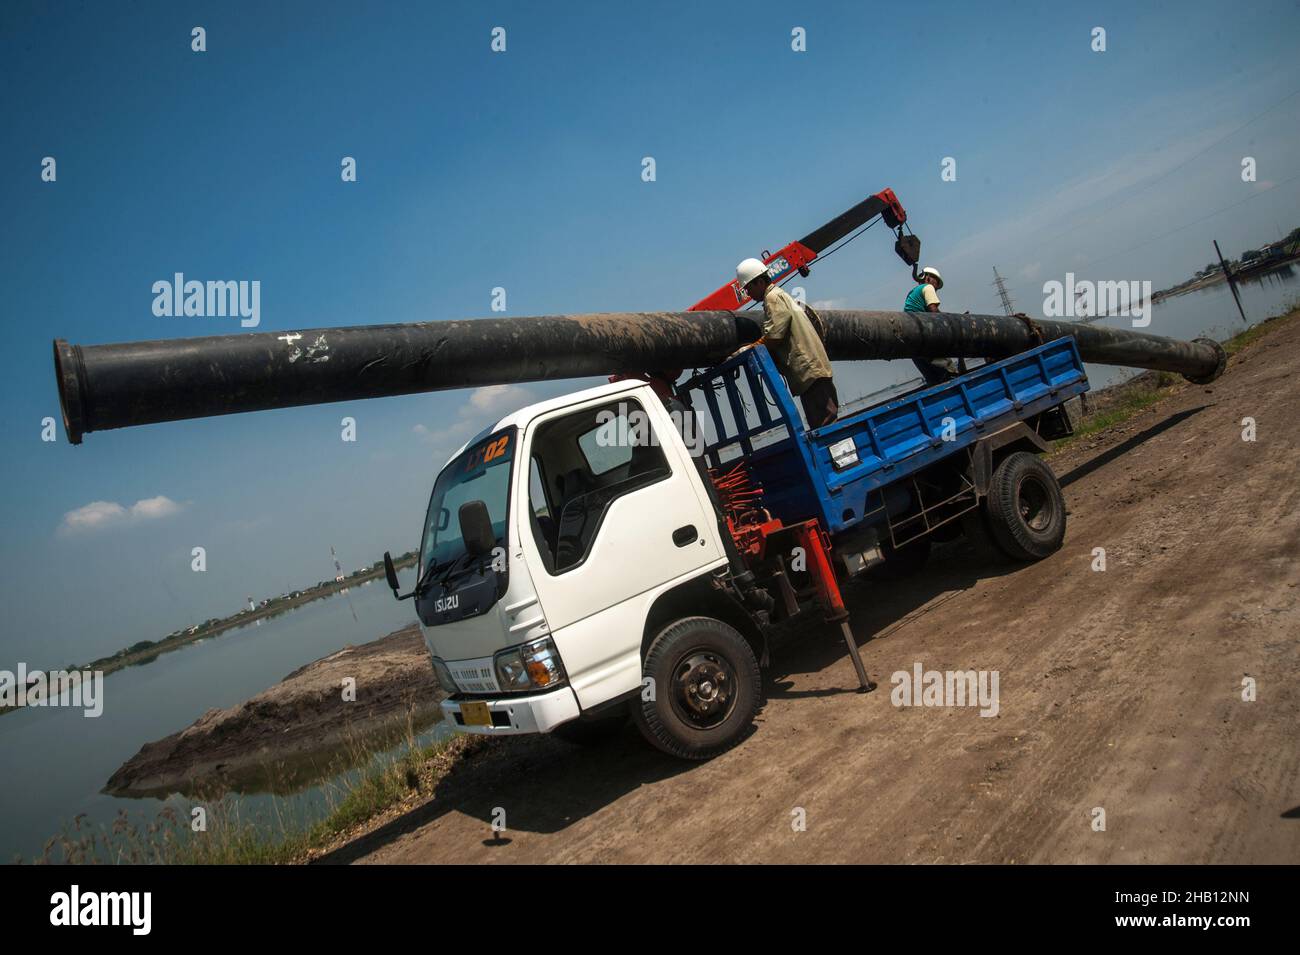 Photo dated October 19, 2016 - Workers activities seen carrying the big pipe at the Lapindo volcanic mudflow disaster area in Sidoarjo, East Java province, Indonesia. Since May 29, 2006 until now, as 1,143.3 hectares area land has changes be the natural territory of the world's largest mud volcano were belches water, oil, methane gas and mud everytime. The geological activity is a contributor to methane gas emissions amount as the largest natural gas manifestation on earth, based on the study report published in the journal Scientific Reports on February 18, 2021. Photo by Sutanta Aditya/ABACA Stock Photo